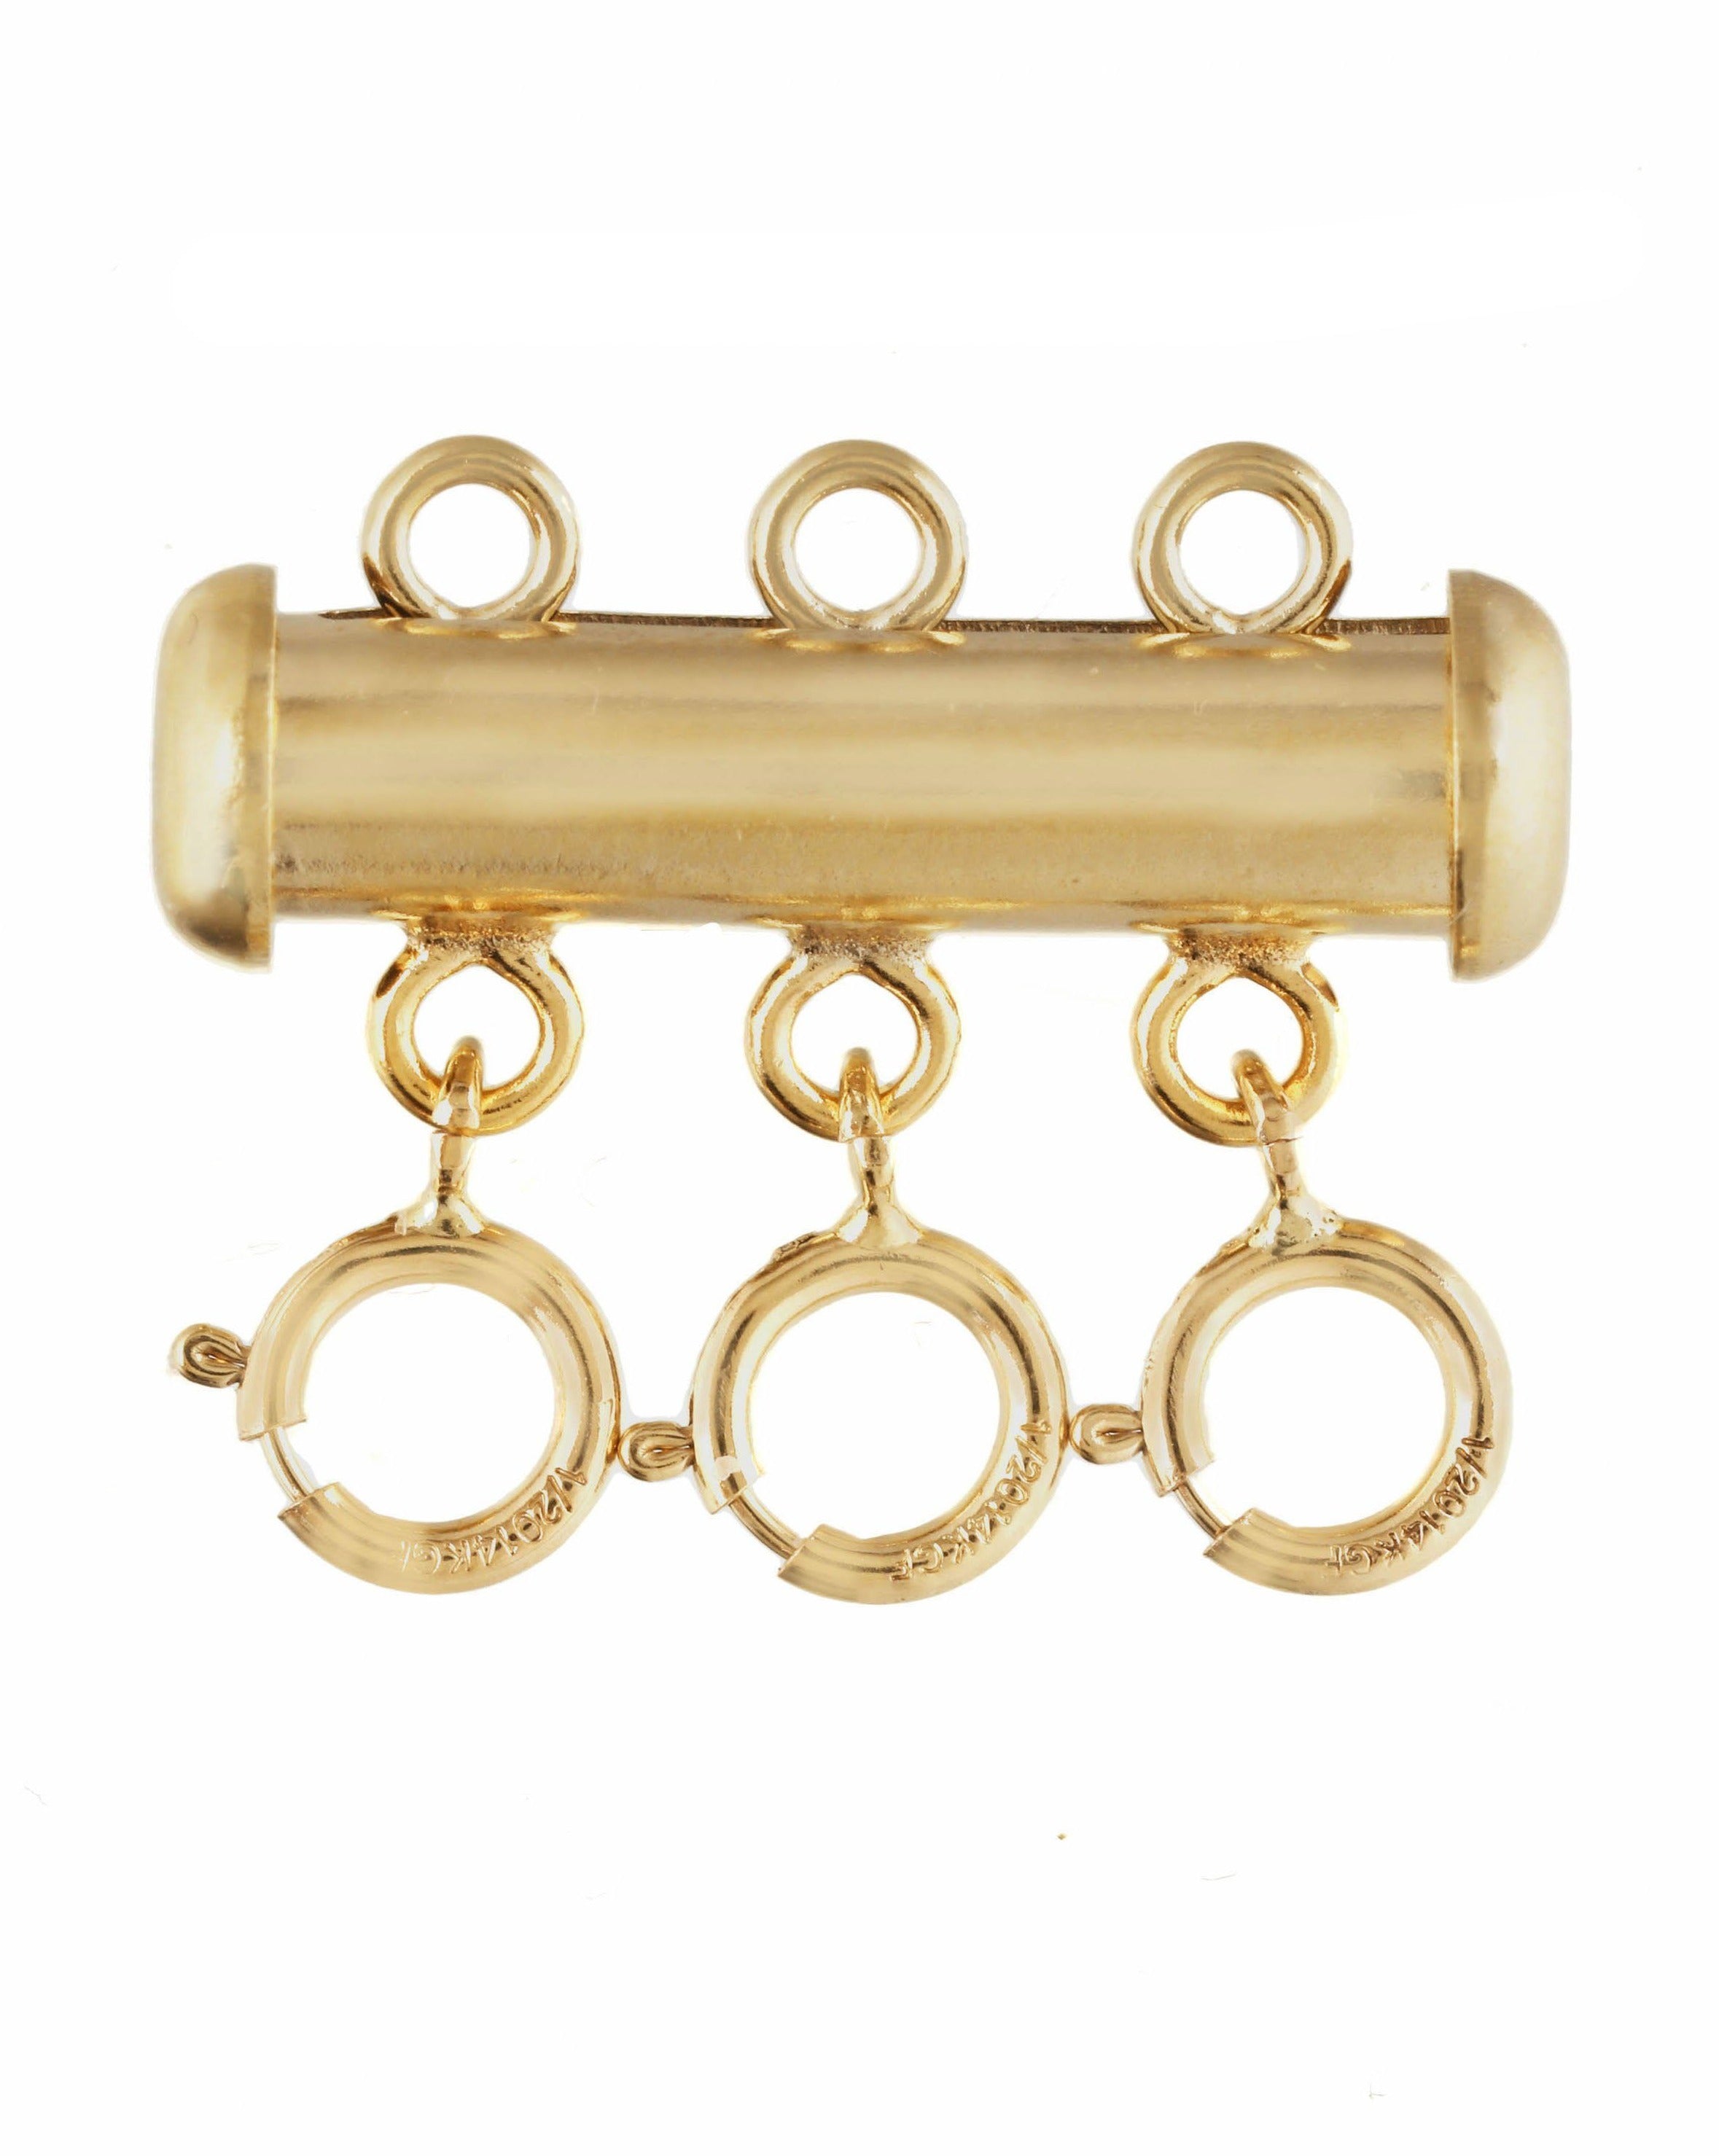 Triple Layering Clasp by KOZAKH. A 14K Gold Filled clasp that atttaches up to 3 necklaces.